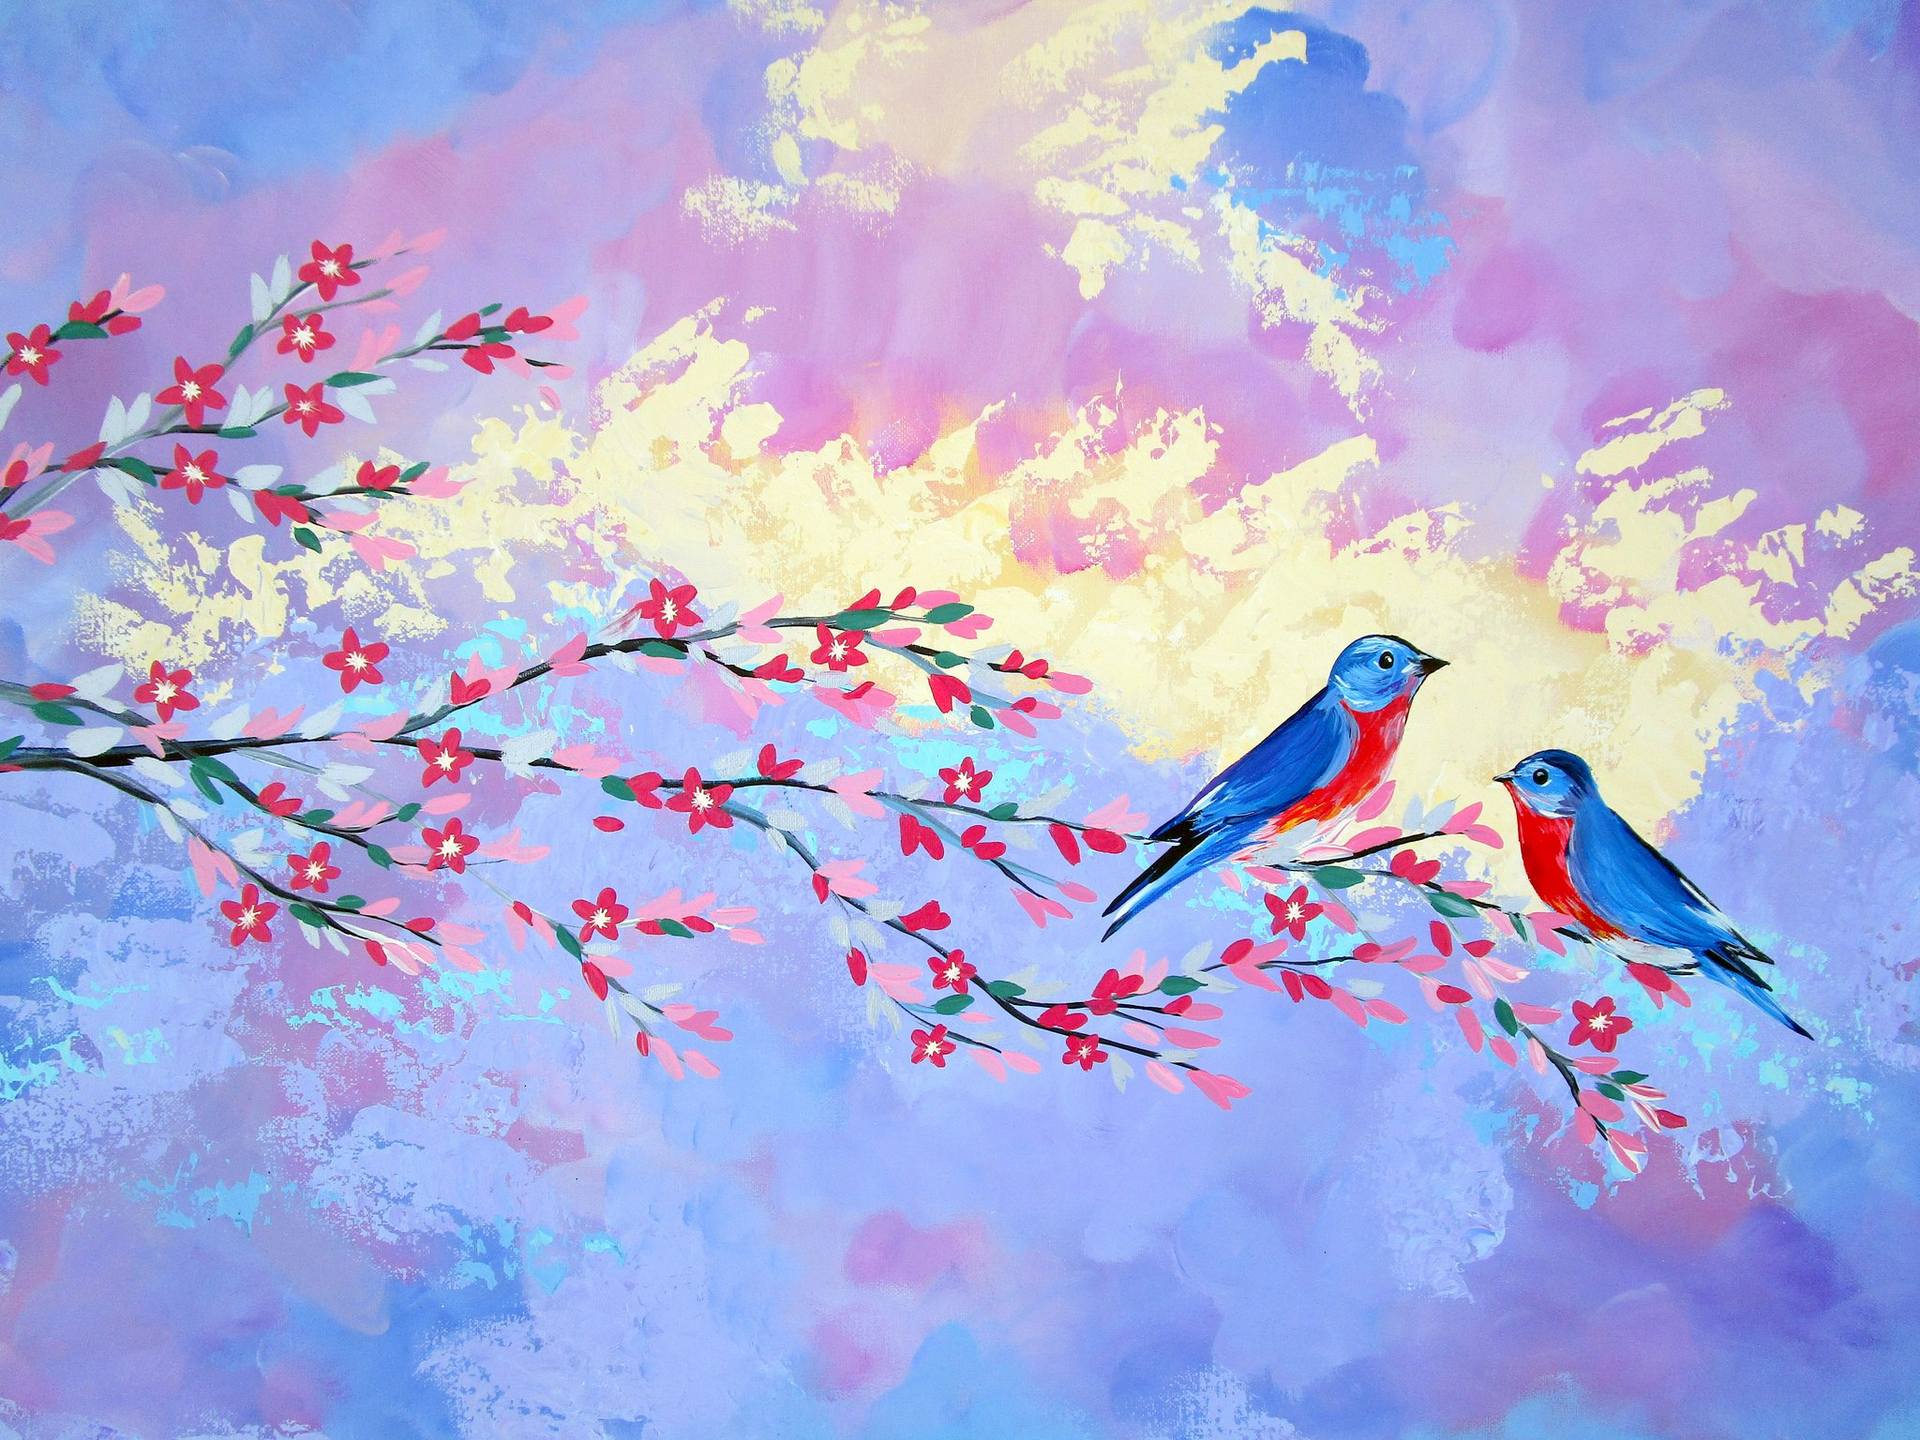 Original Painting Love Bird Art Light Blue Turquoise Cherry Blossoms Tree  Acrylic on Stretched Canvas Ships Immediately 45x30 - Art by Nathalie Van